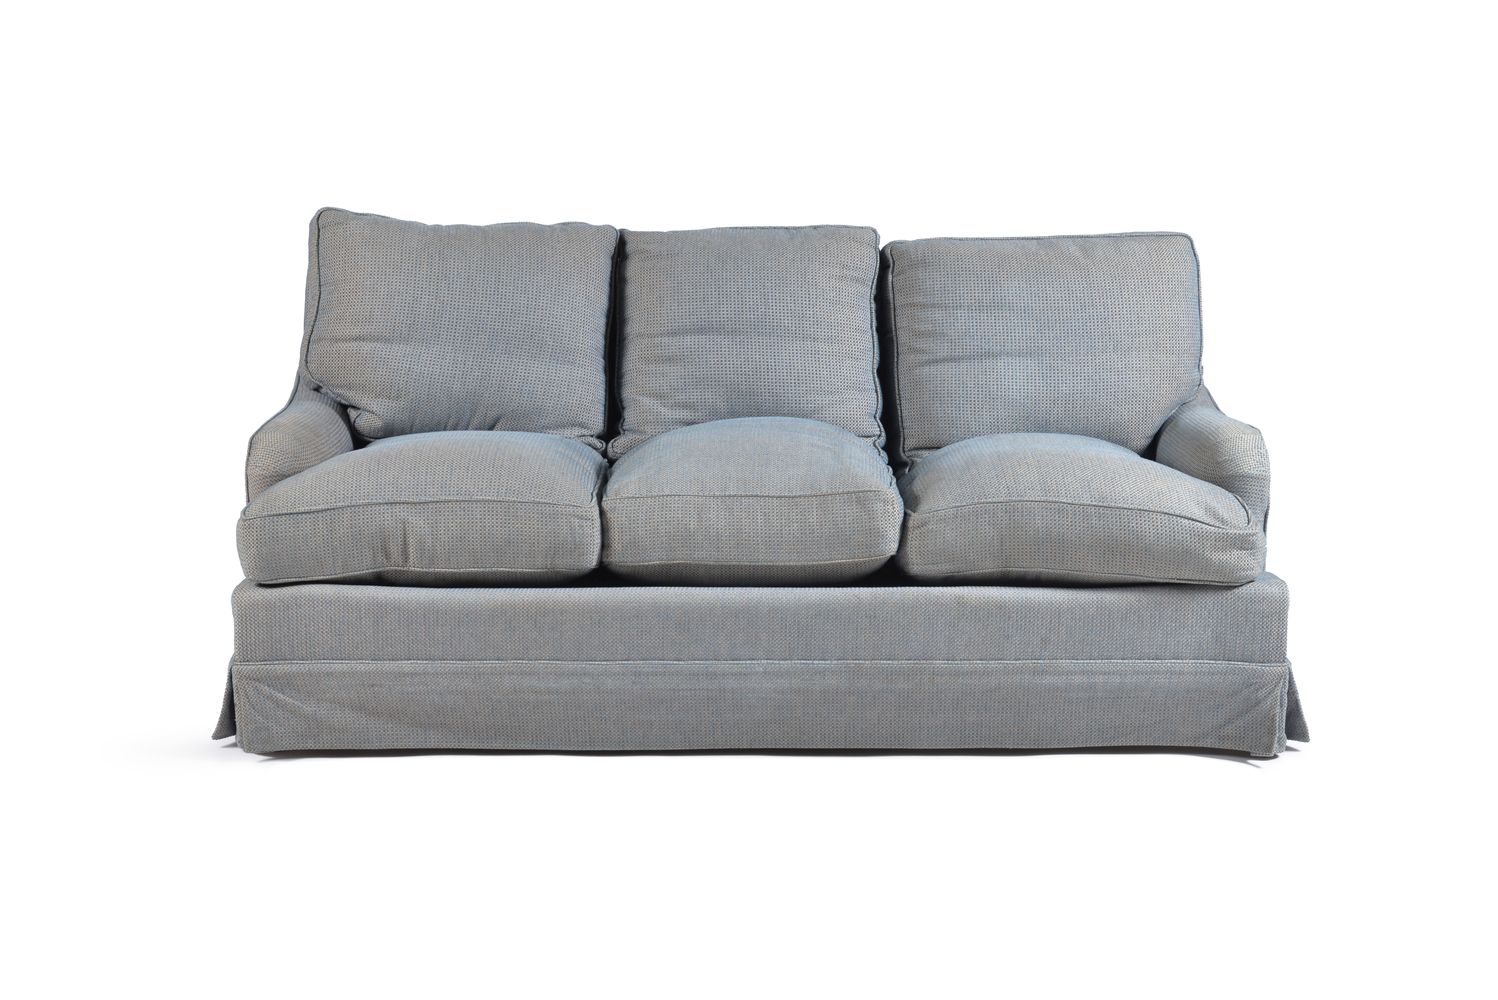 A blue chenille type upholstered three seat sofa